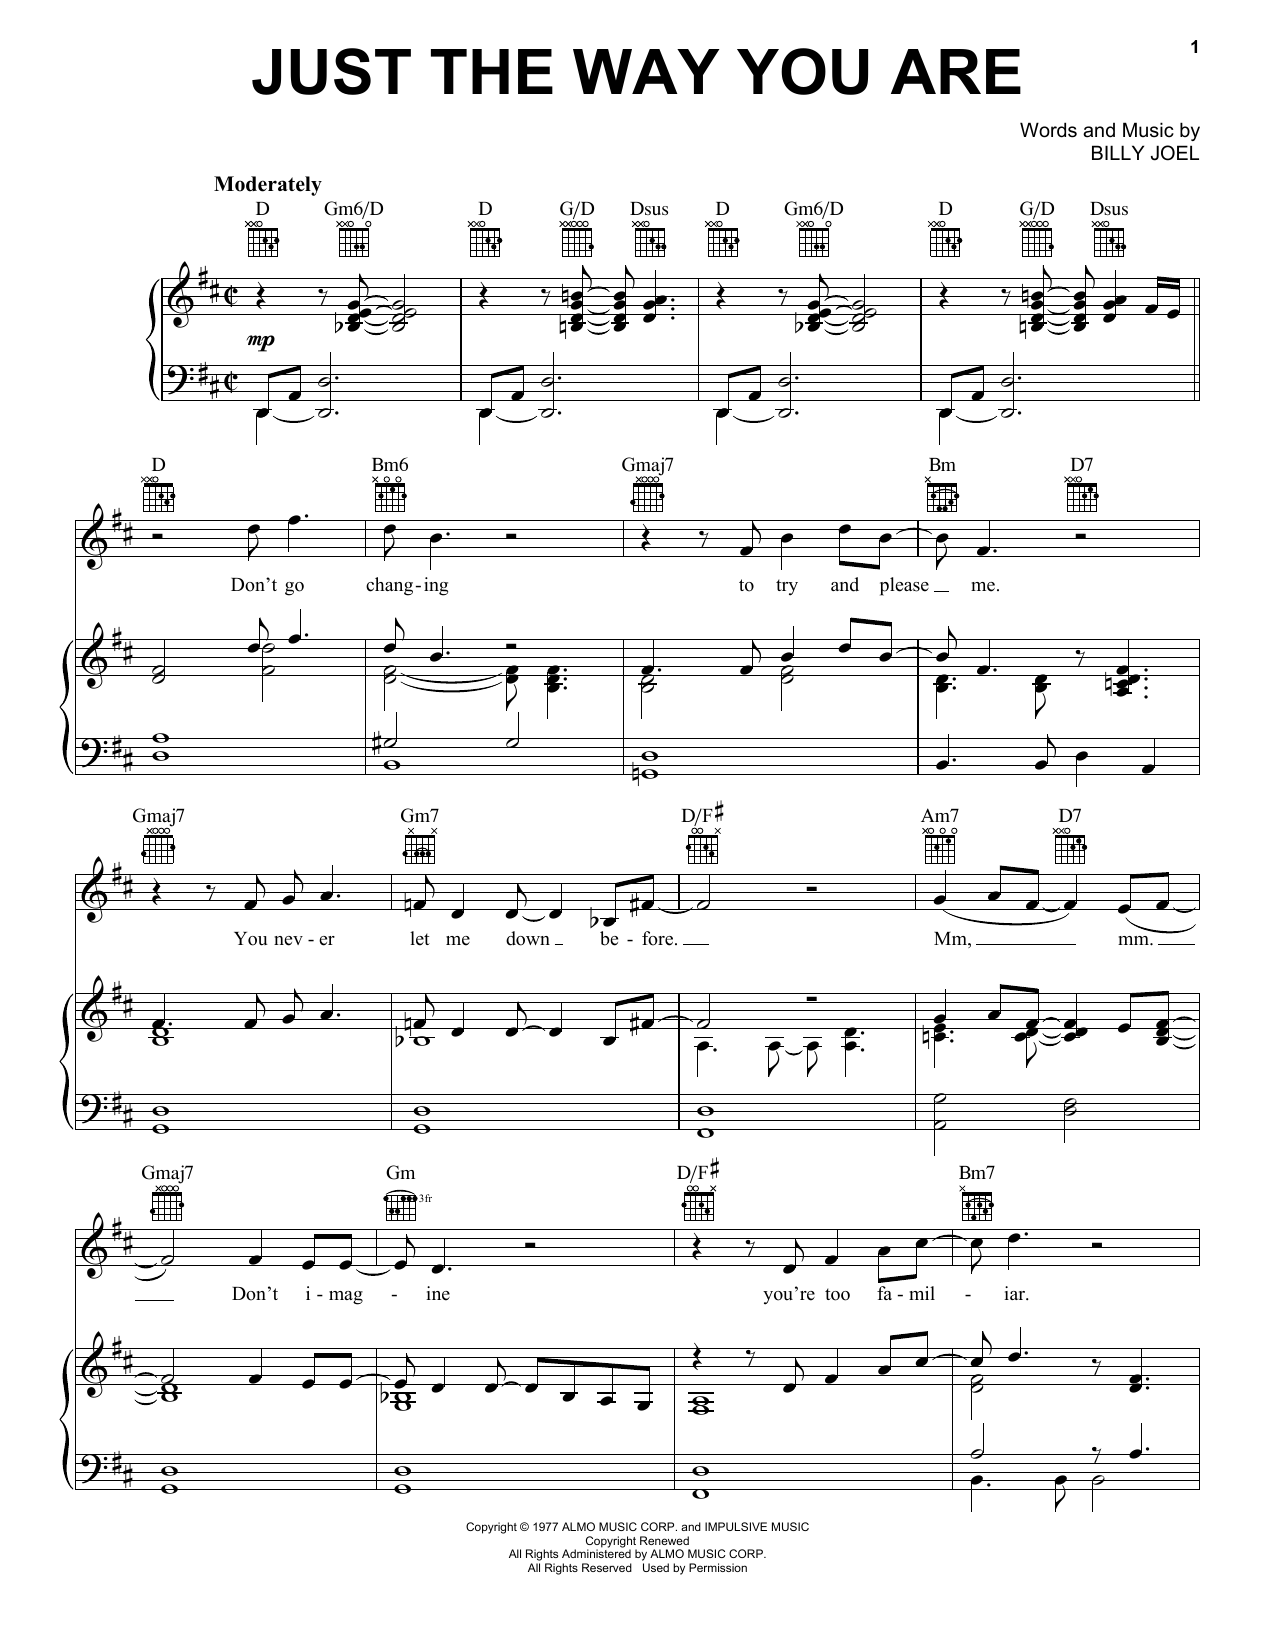 Billy Joel Just The Way You Are sheet music notes and chords. Download Printable PDF.